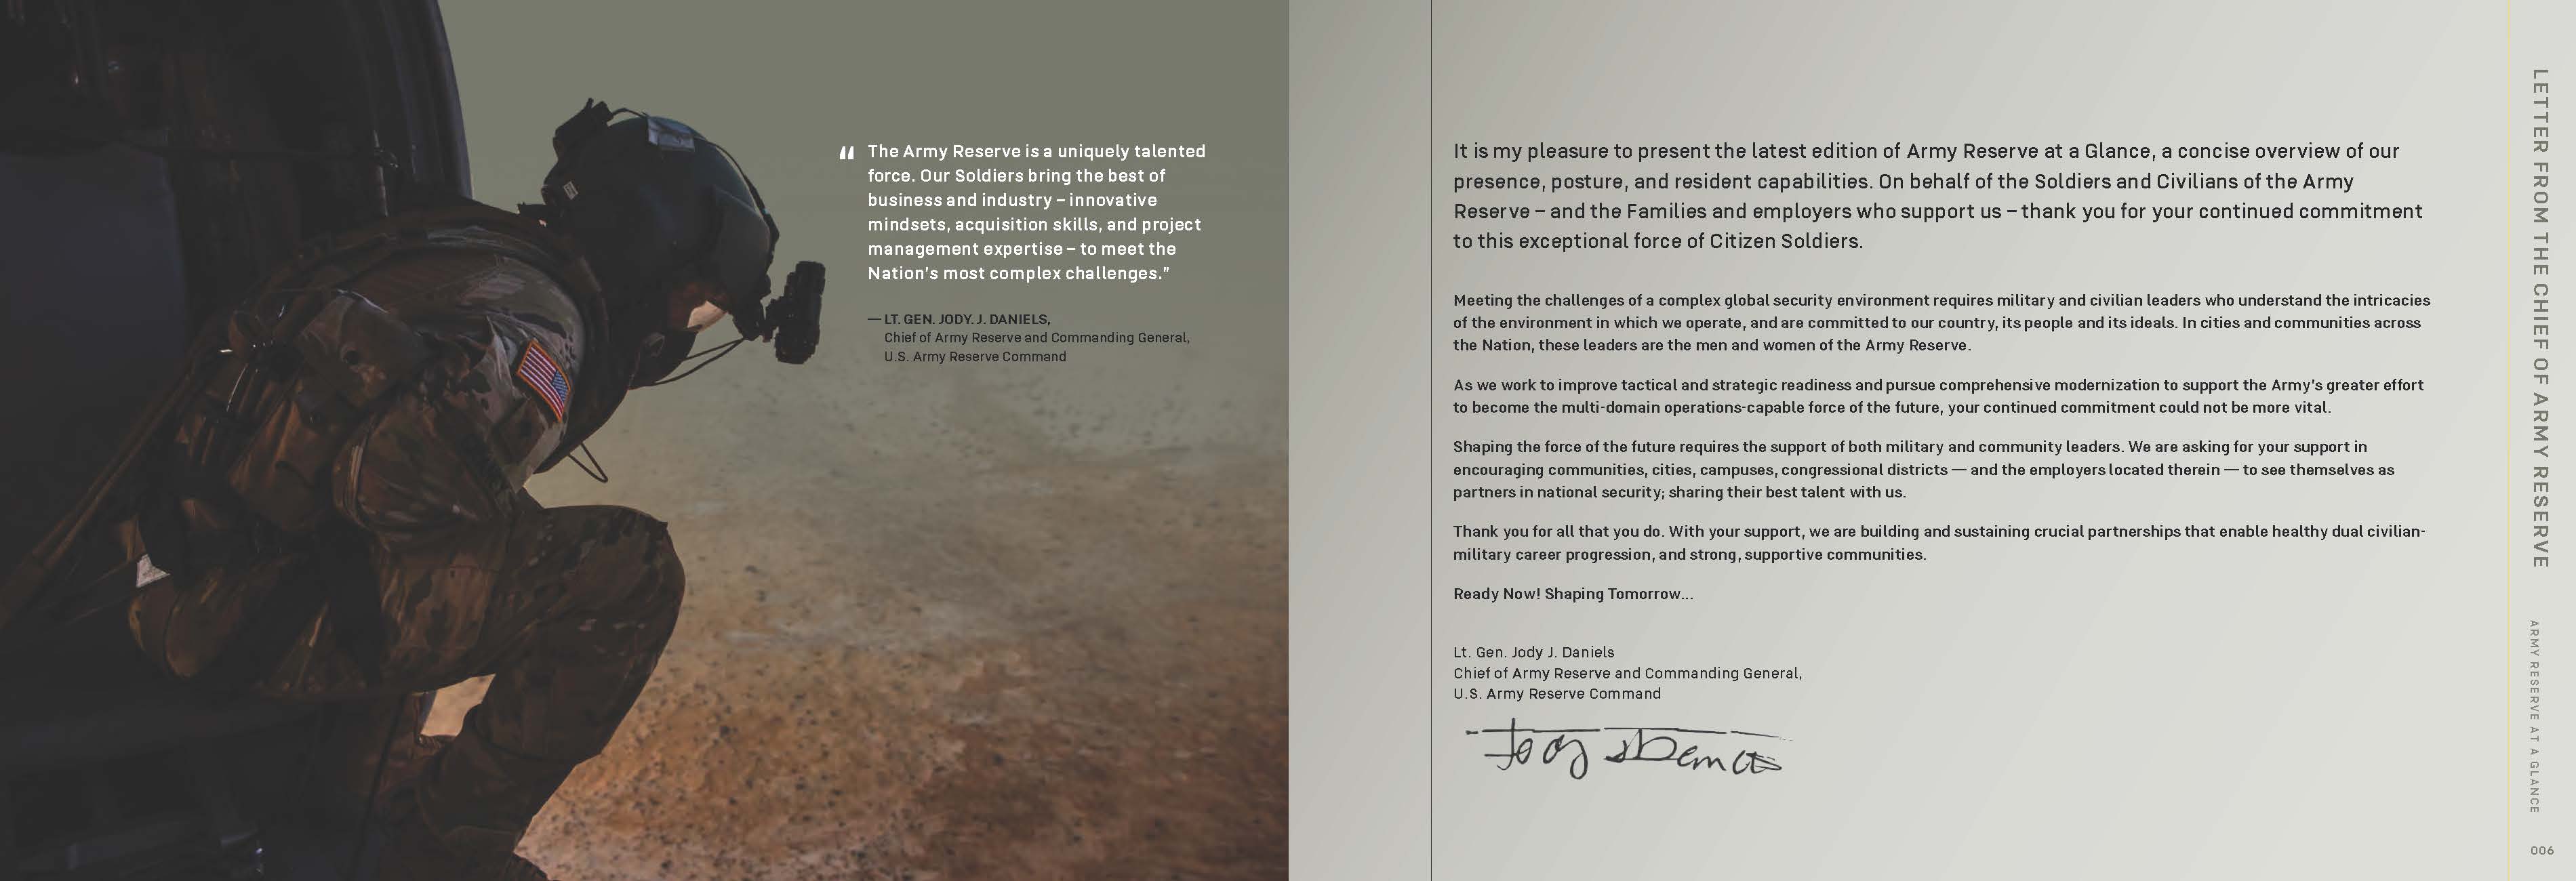 Page of Army Reserve At A Glance with CG's Letter and an image of a Soldier on a helicopter